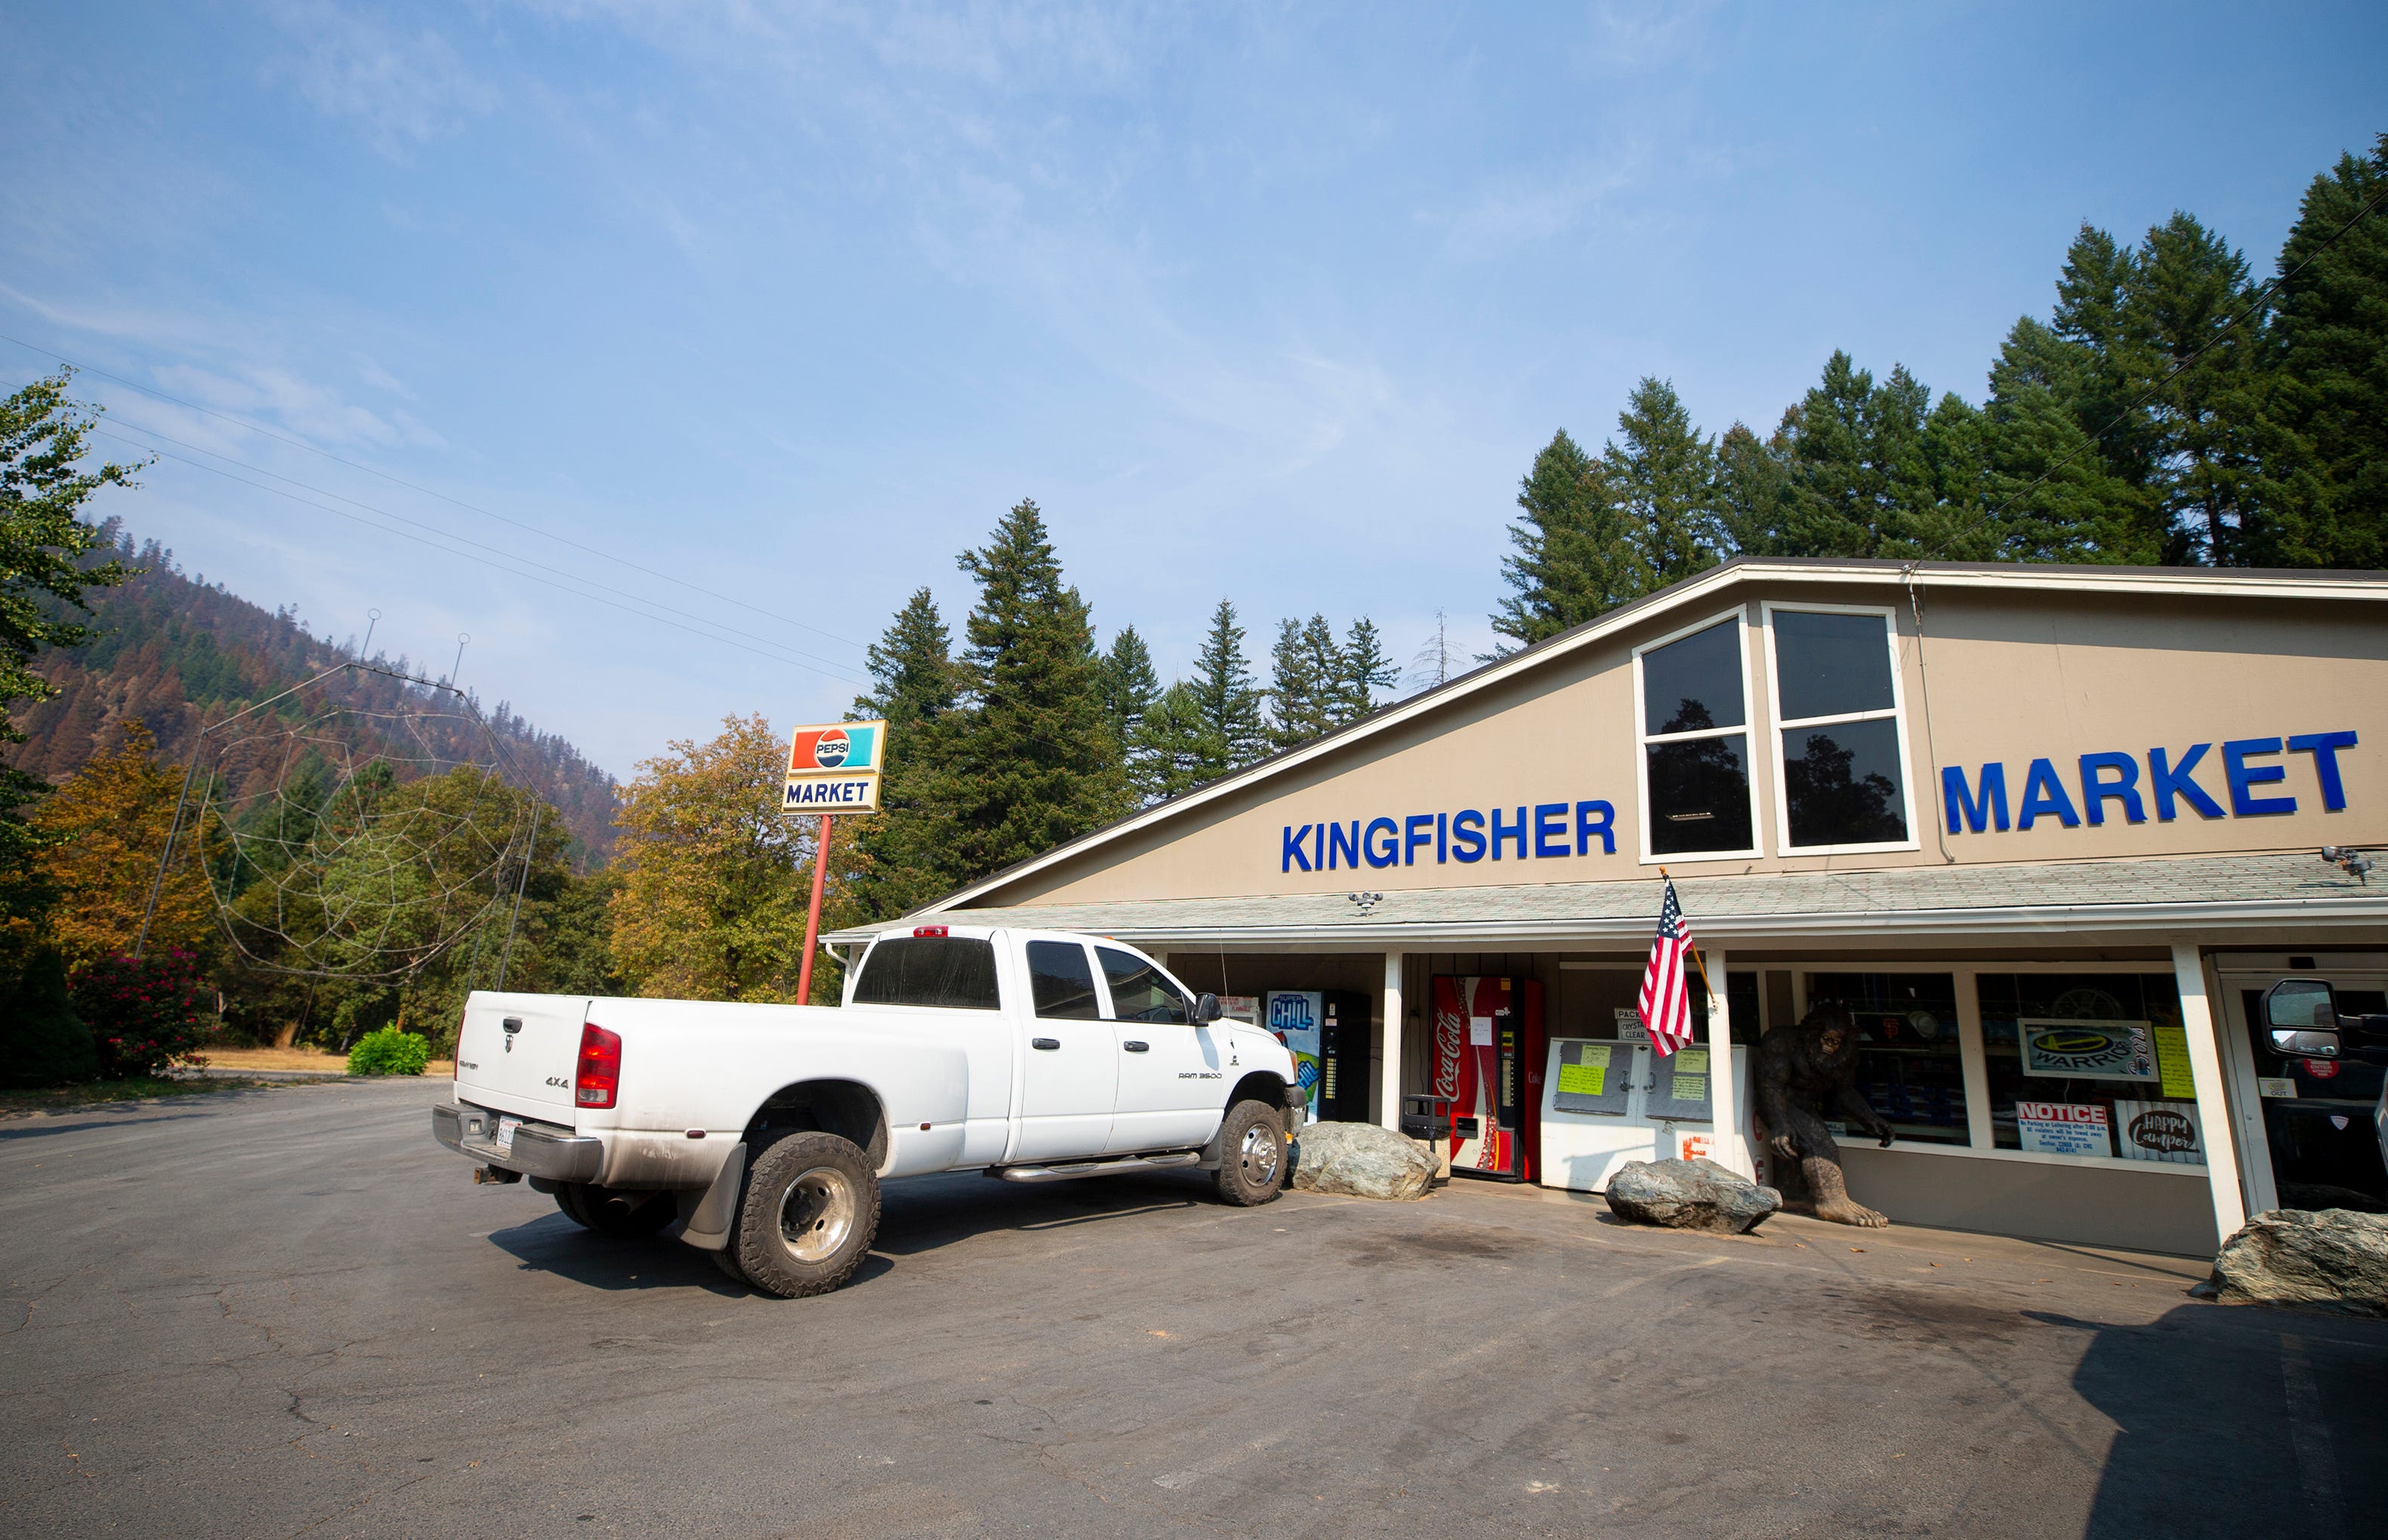 Leeon Hillman, and his wife, Erin, owners of Kingfisher Market in Happy Camp, lost their home to the Slater Fire on Sept. 9, 2020.